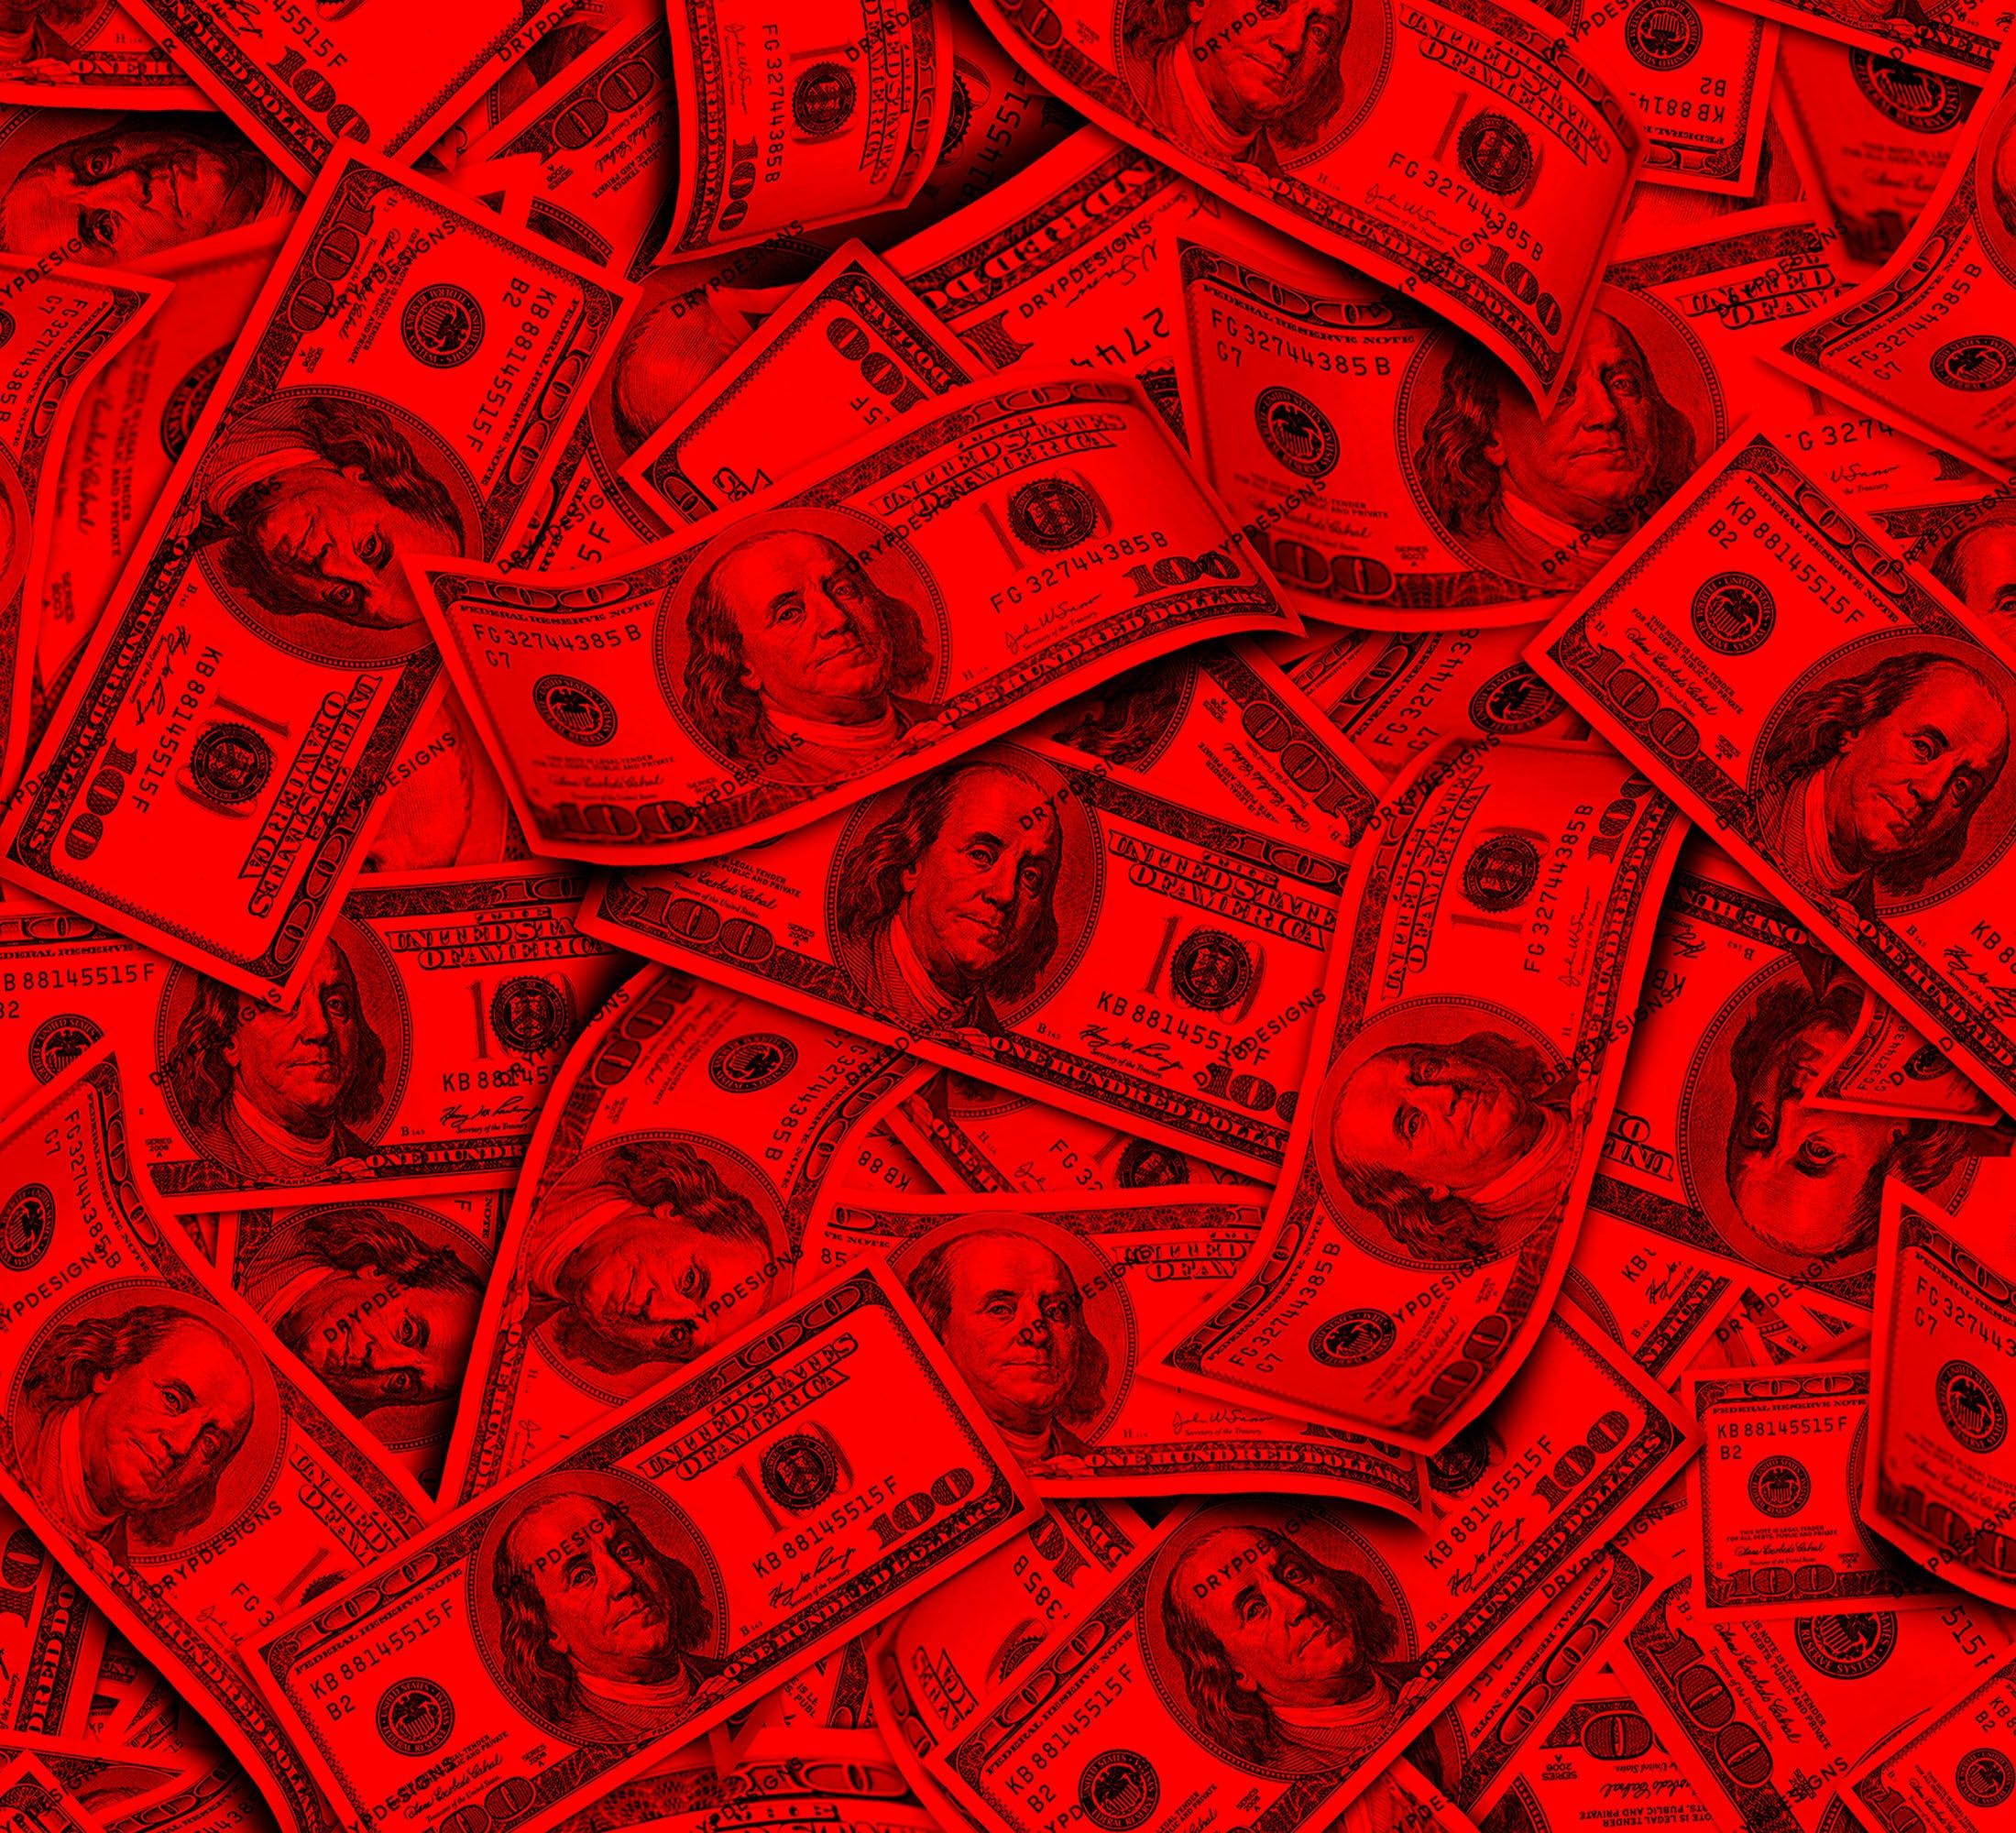 A pile of red money on a red background - Money